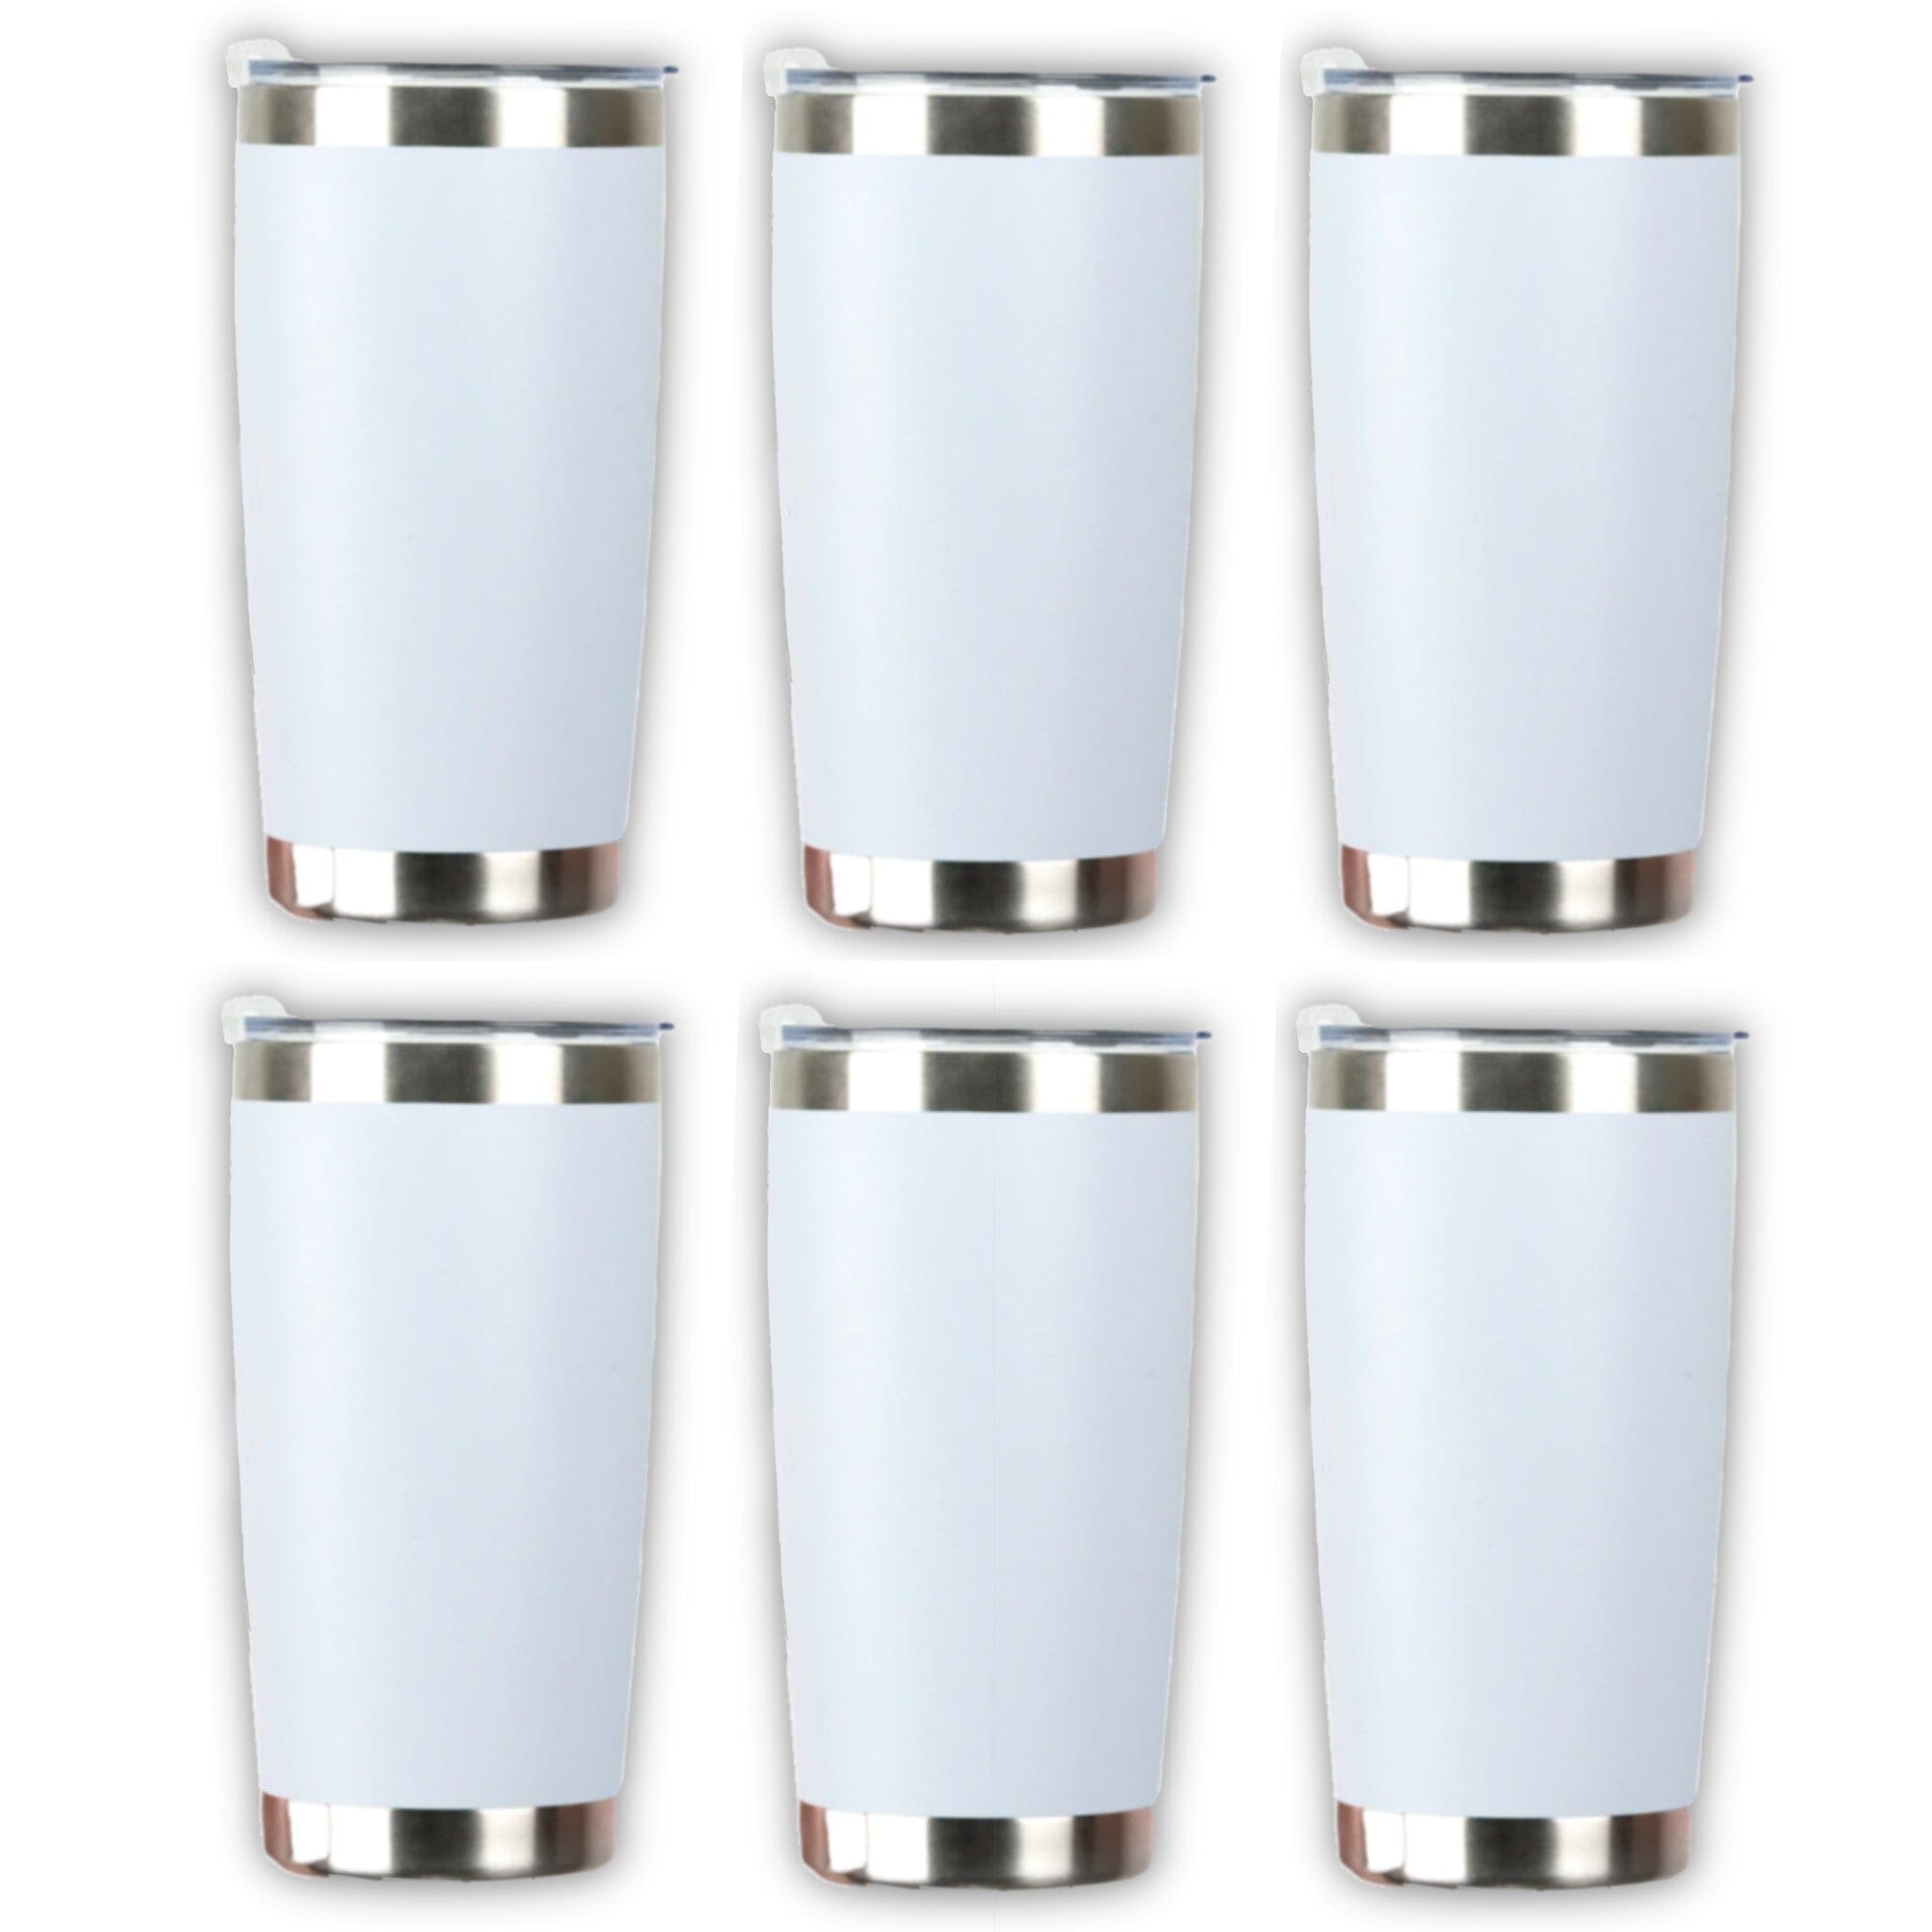 Stainless Tumblers & Mugs - Laser Etched